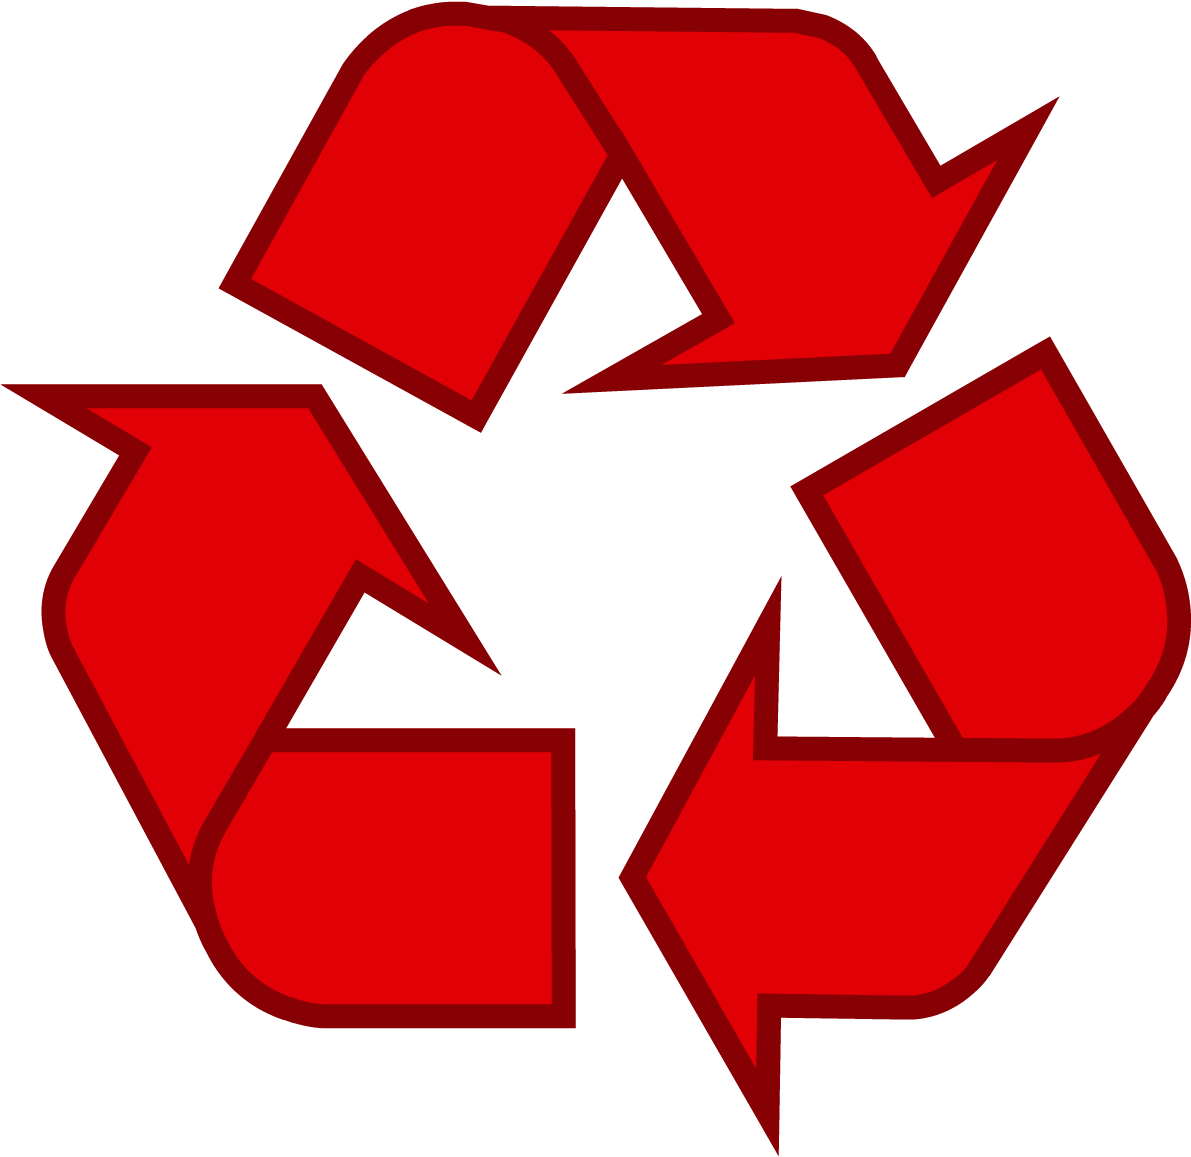 Red Universal Recycling Symbol / Logo / Sign - Recycle Symbol (1200x1171)